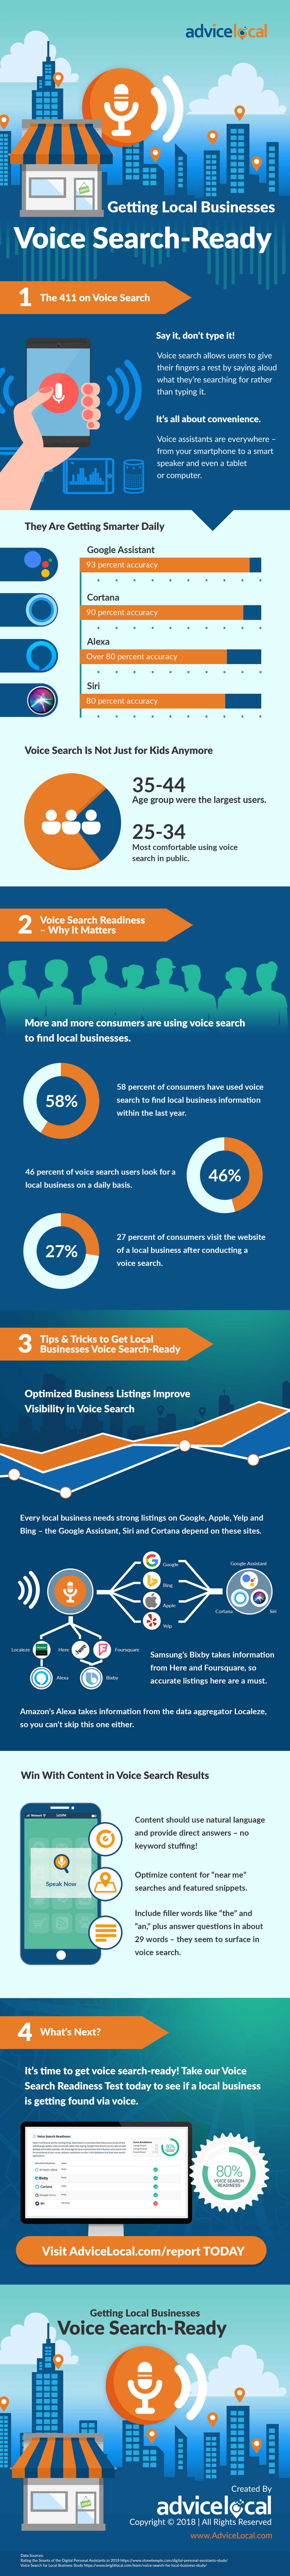 Voice Search Readiness – The What, Why and How for Local Businesses